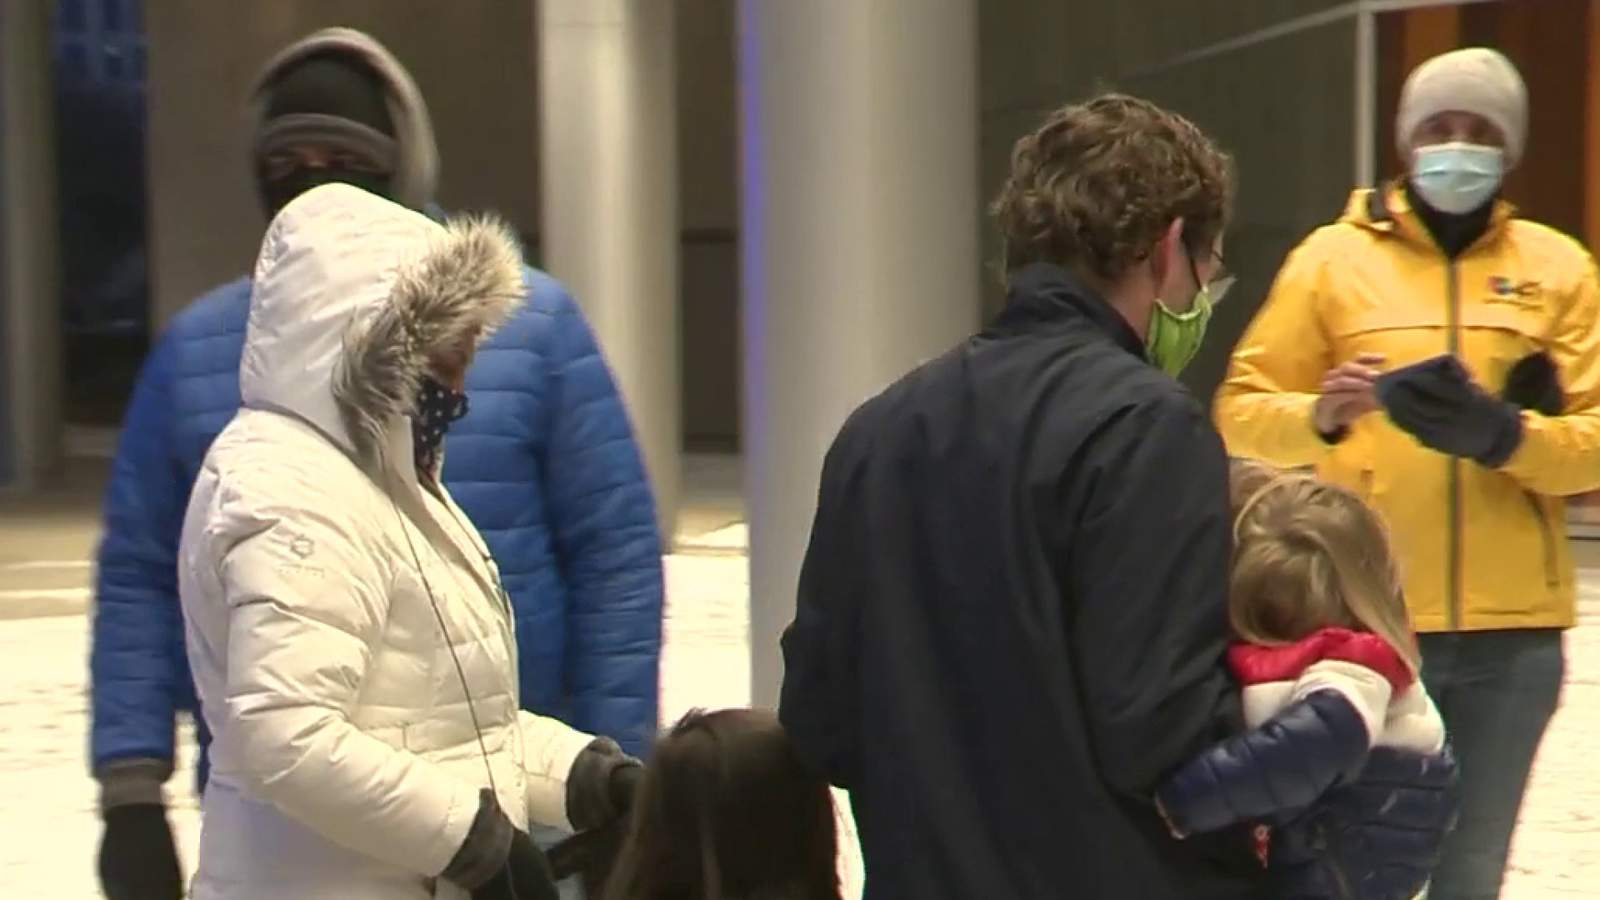 Families relieved to find warmth, safety arrive at city’s warming center